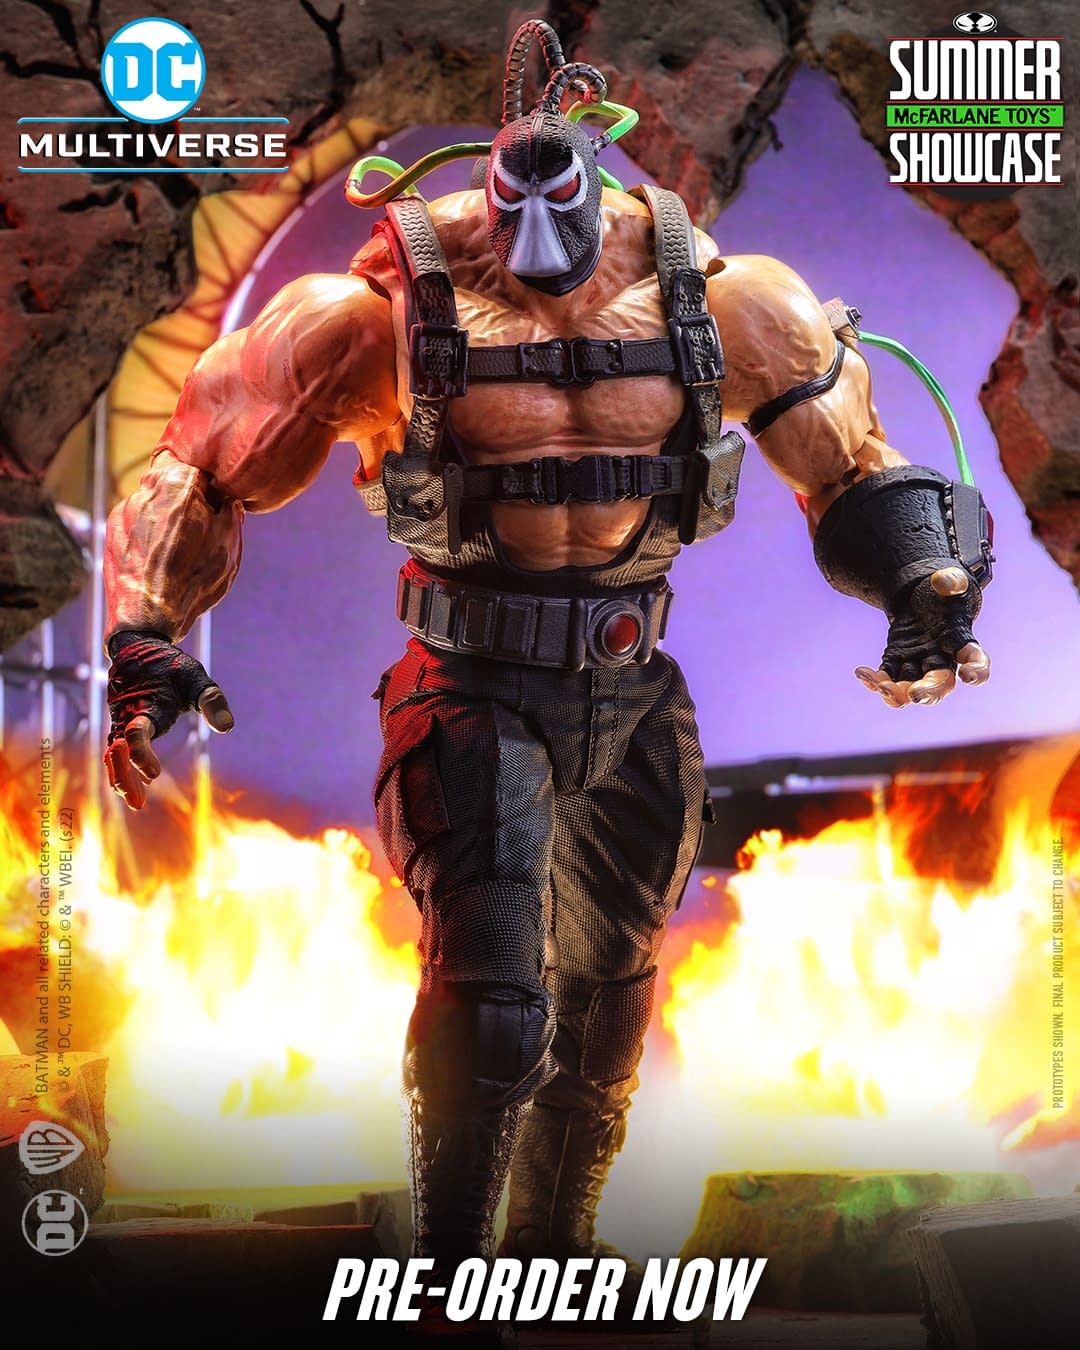 It's Time to Break the Bat with McFarlane's New DC Comics Bane MegaFig